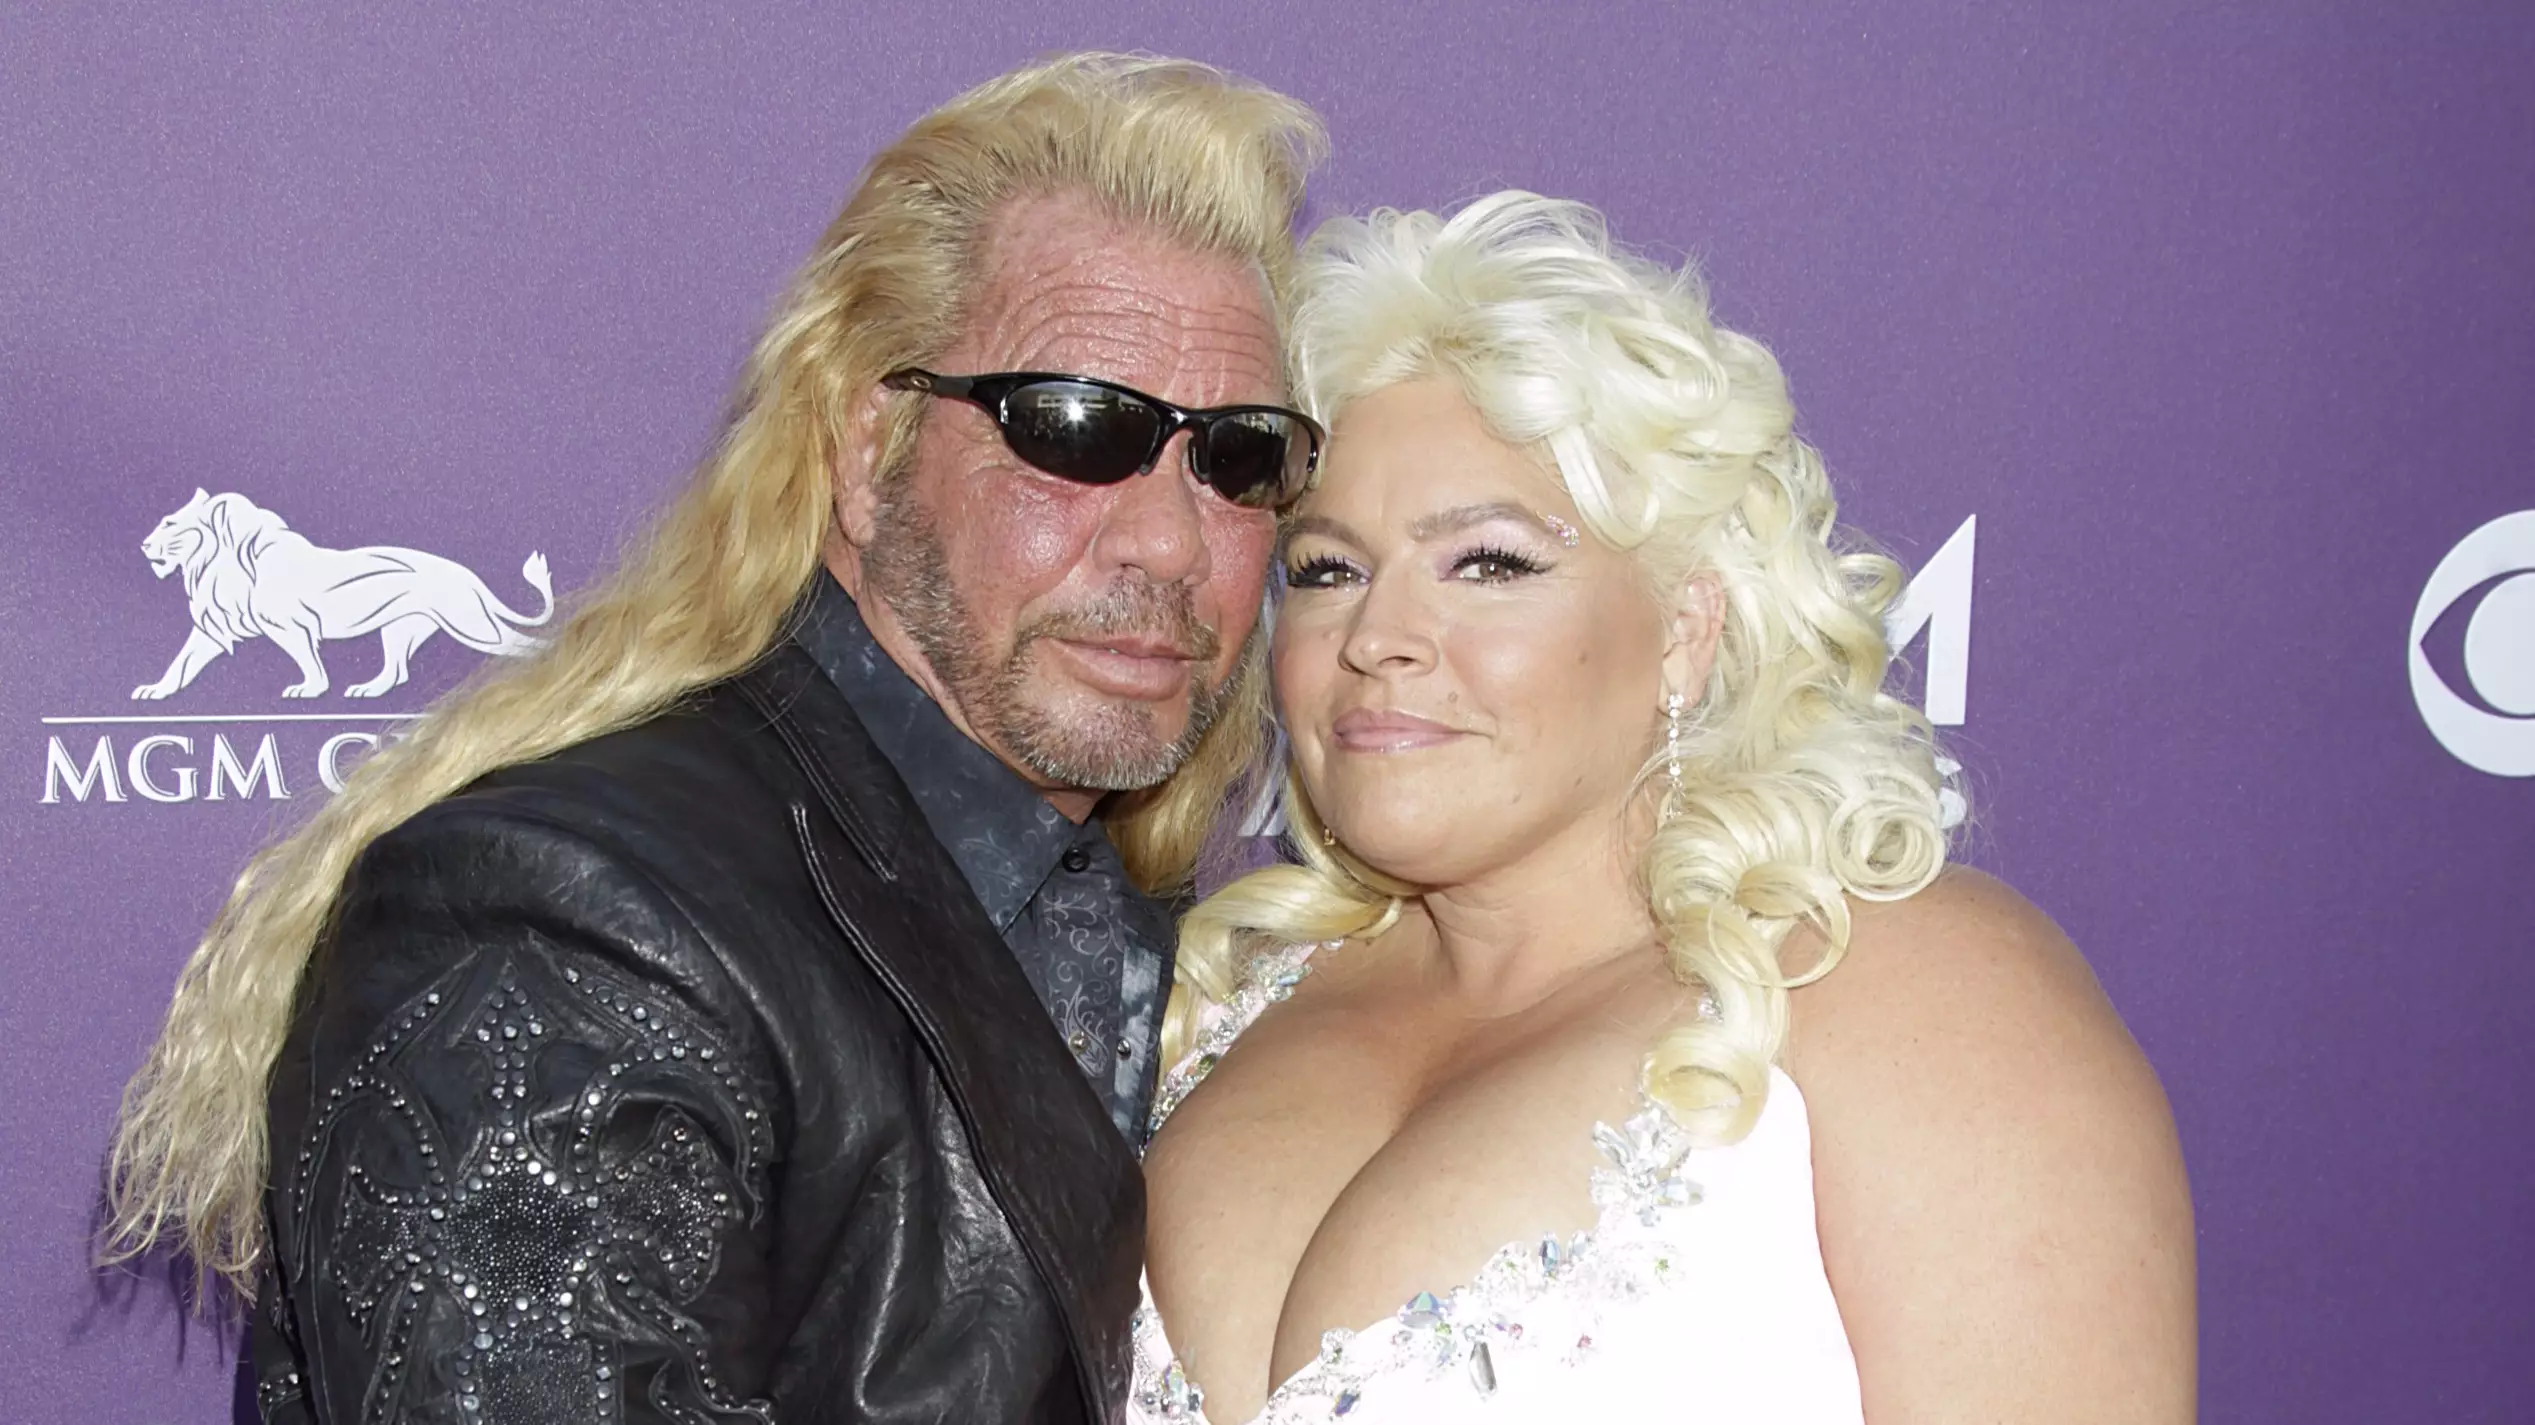 Dog the bounty hunter and wife Beth.